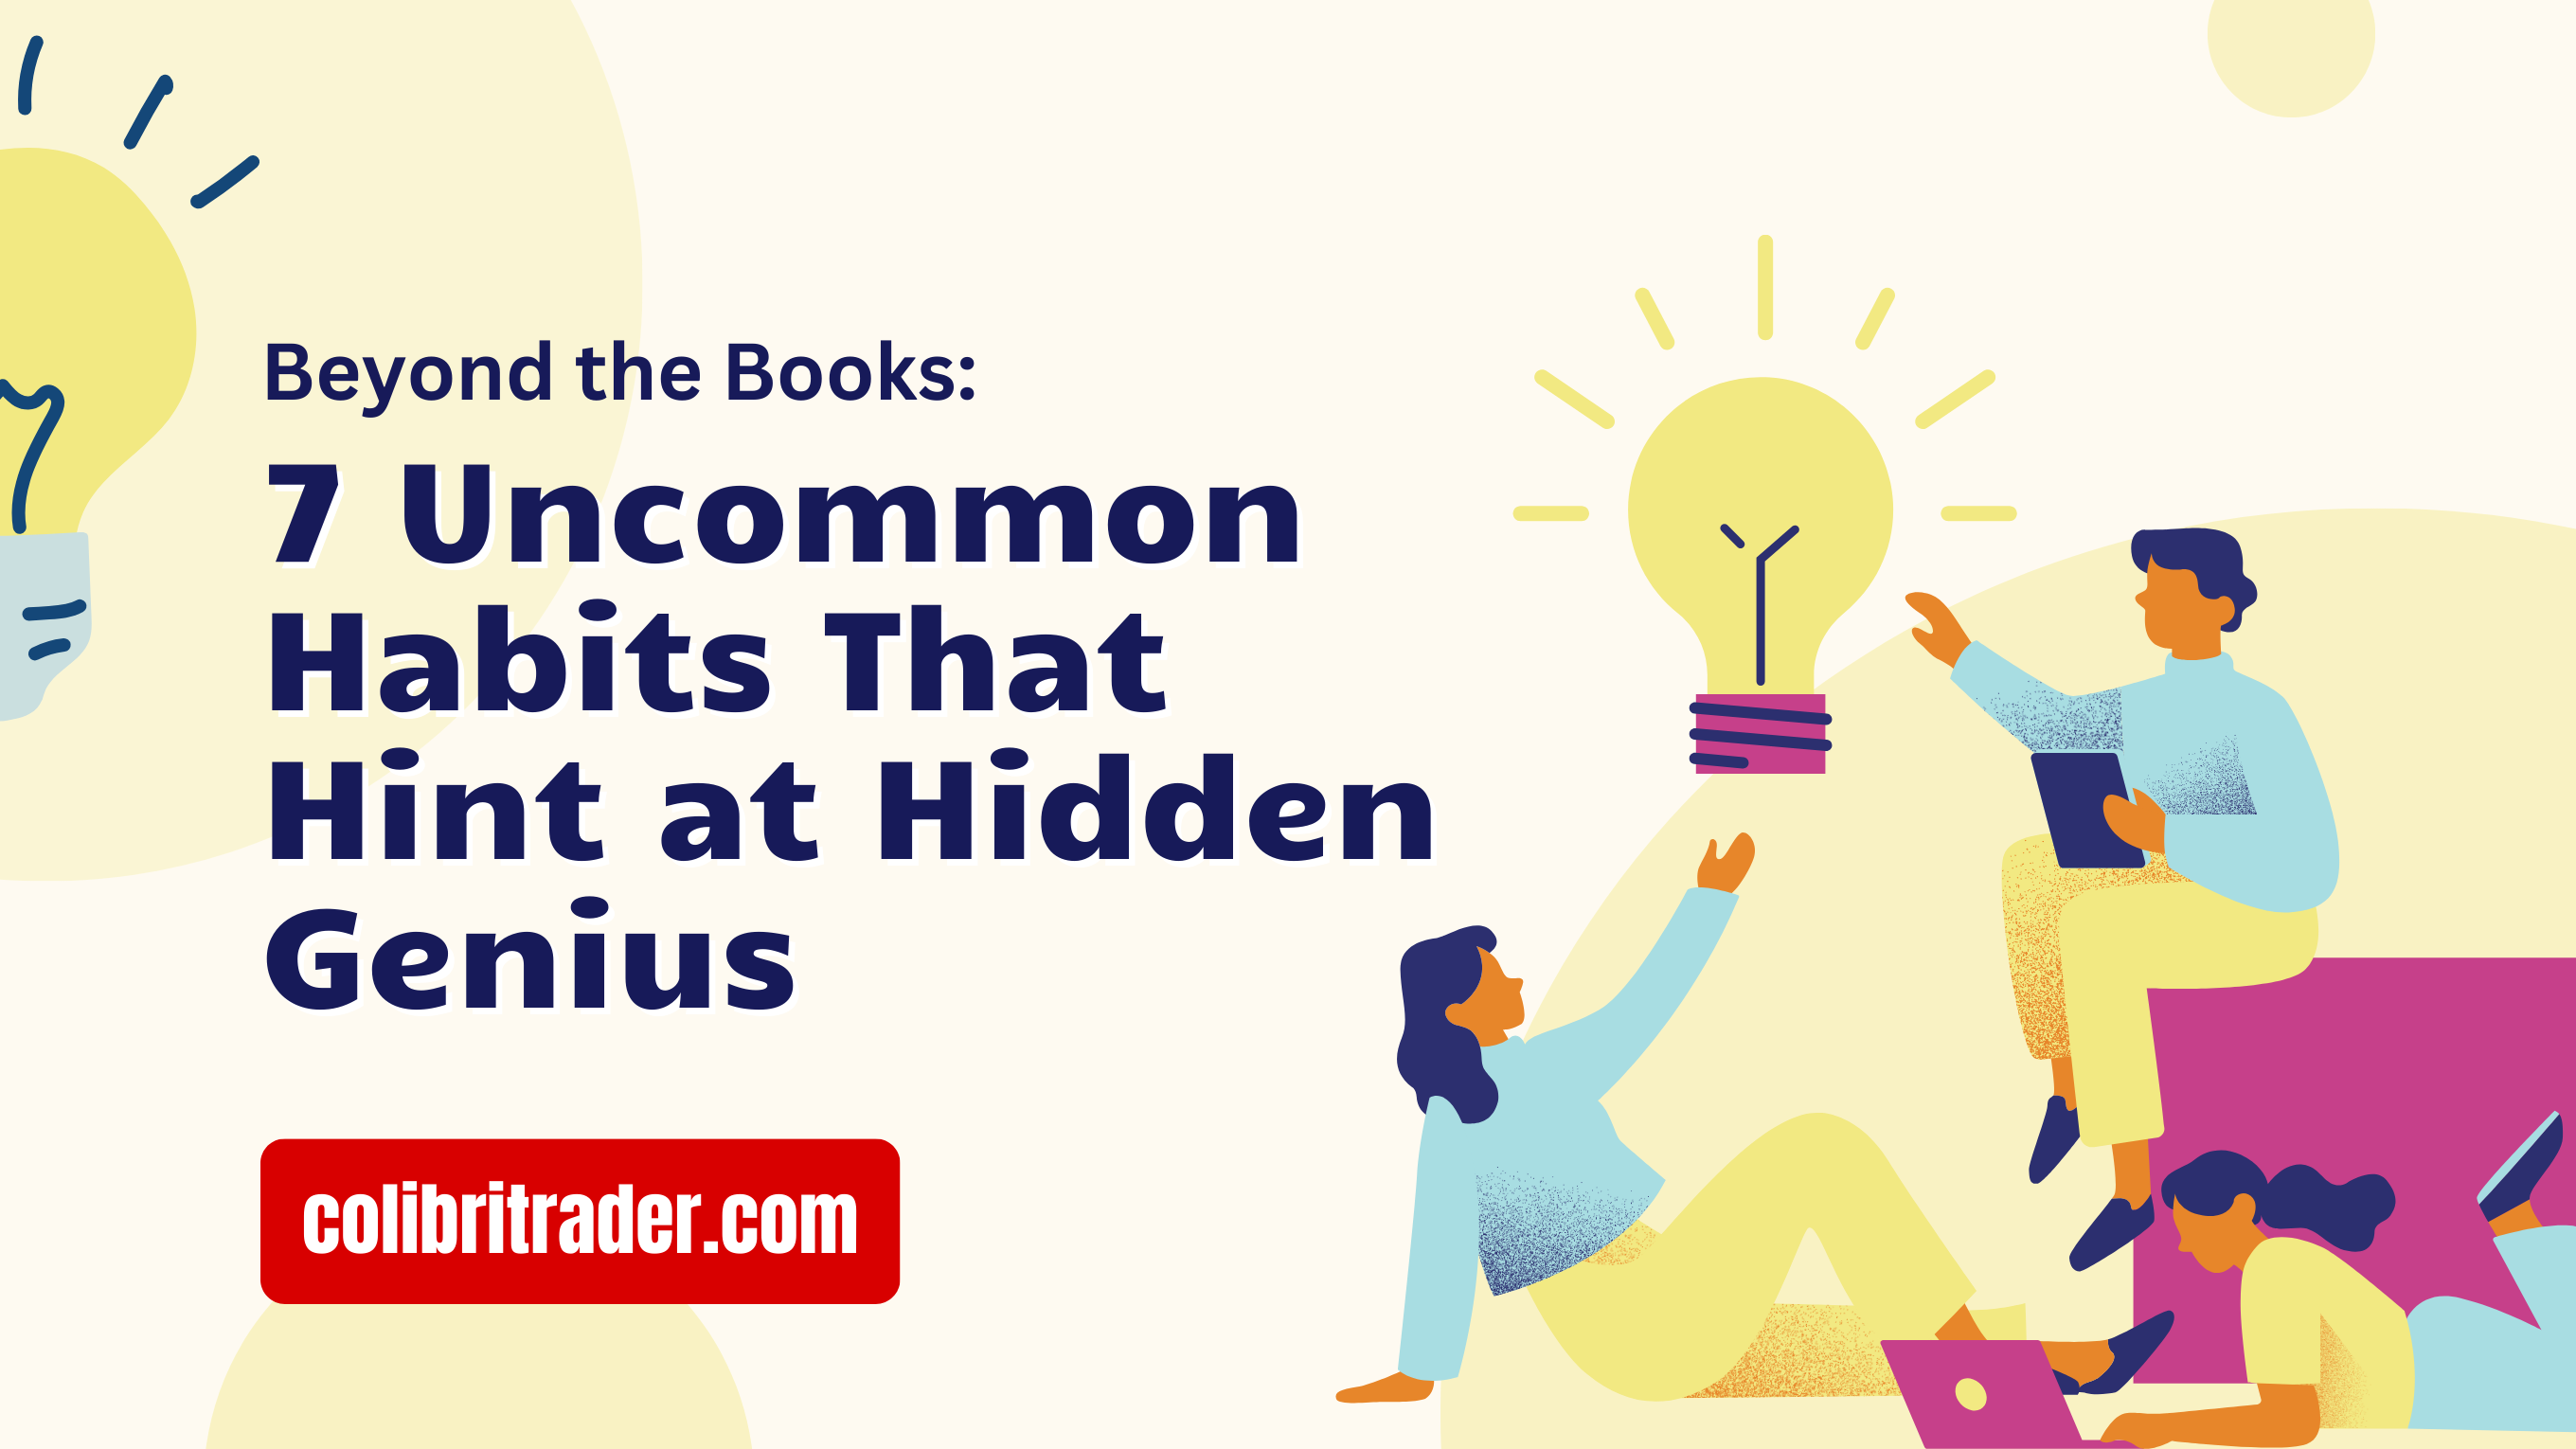 Beyond the Books: 7 Uncommon Habits That Hint at Hidden Genius